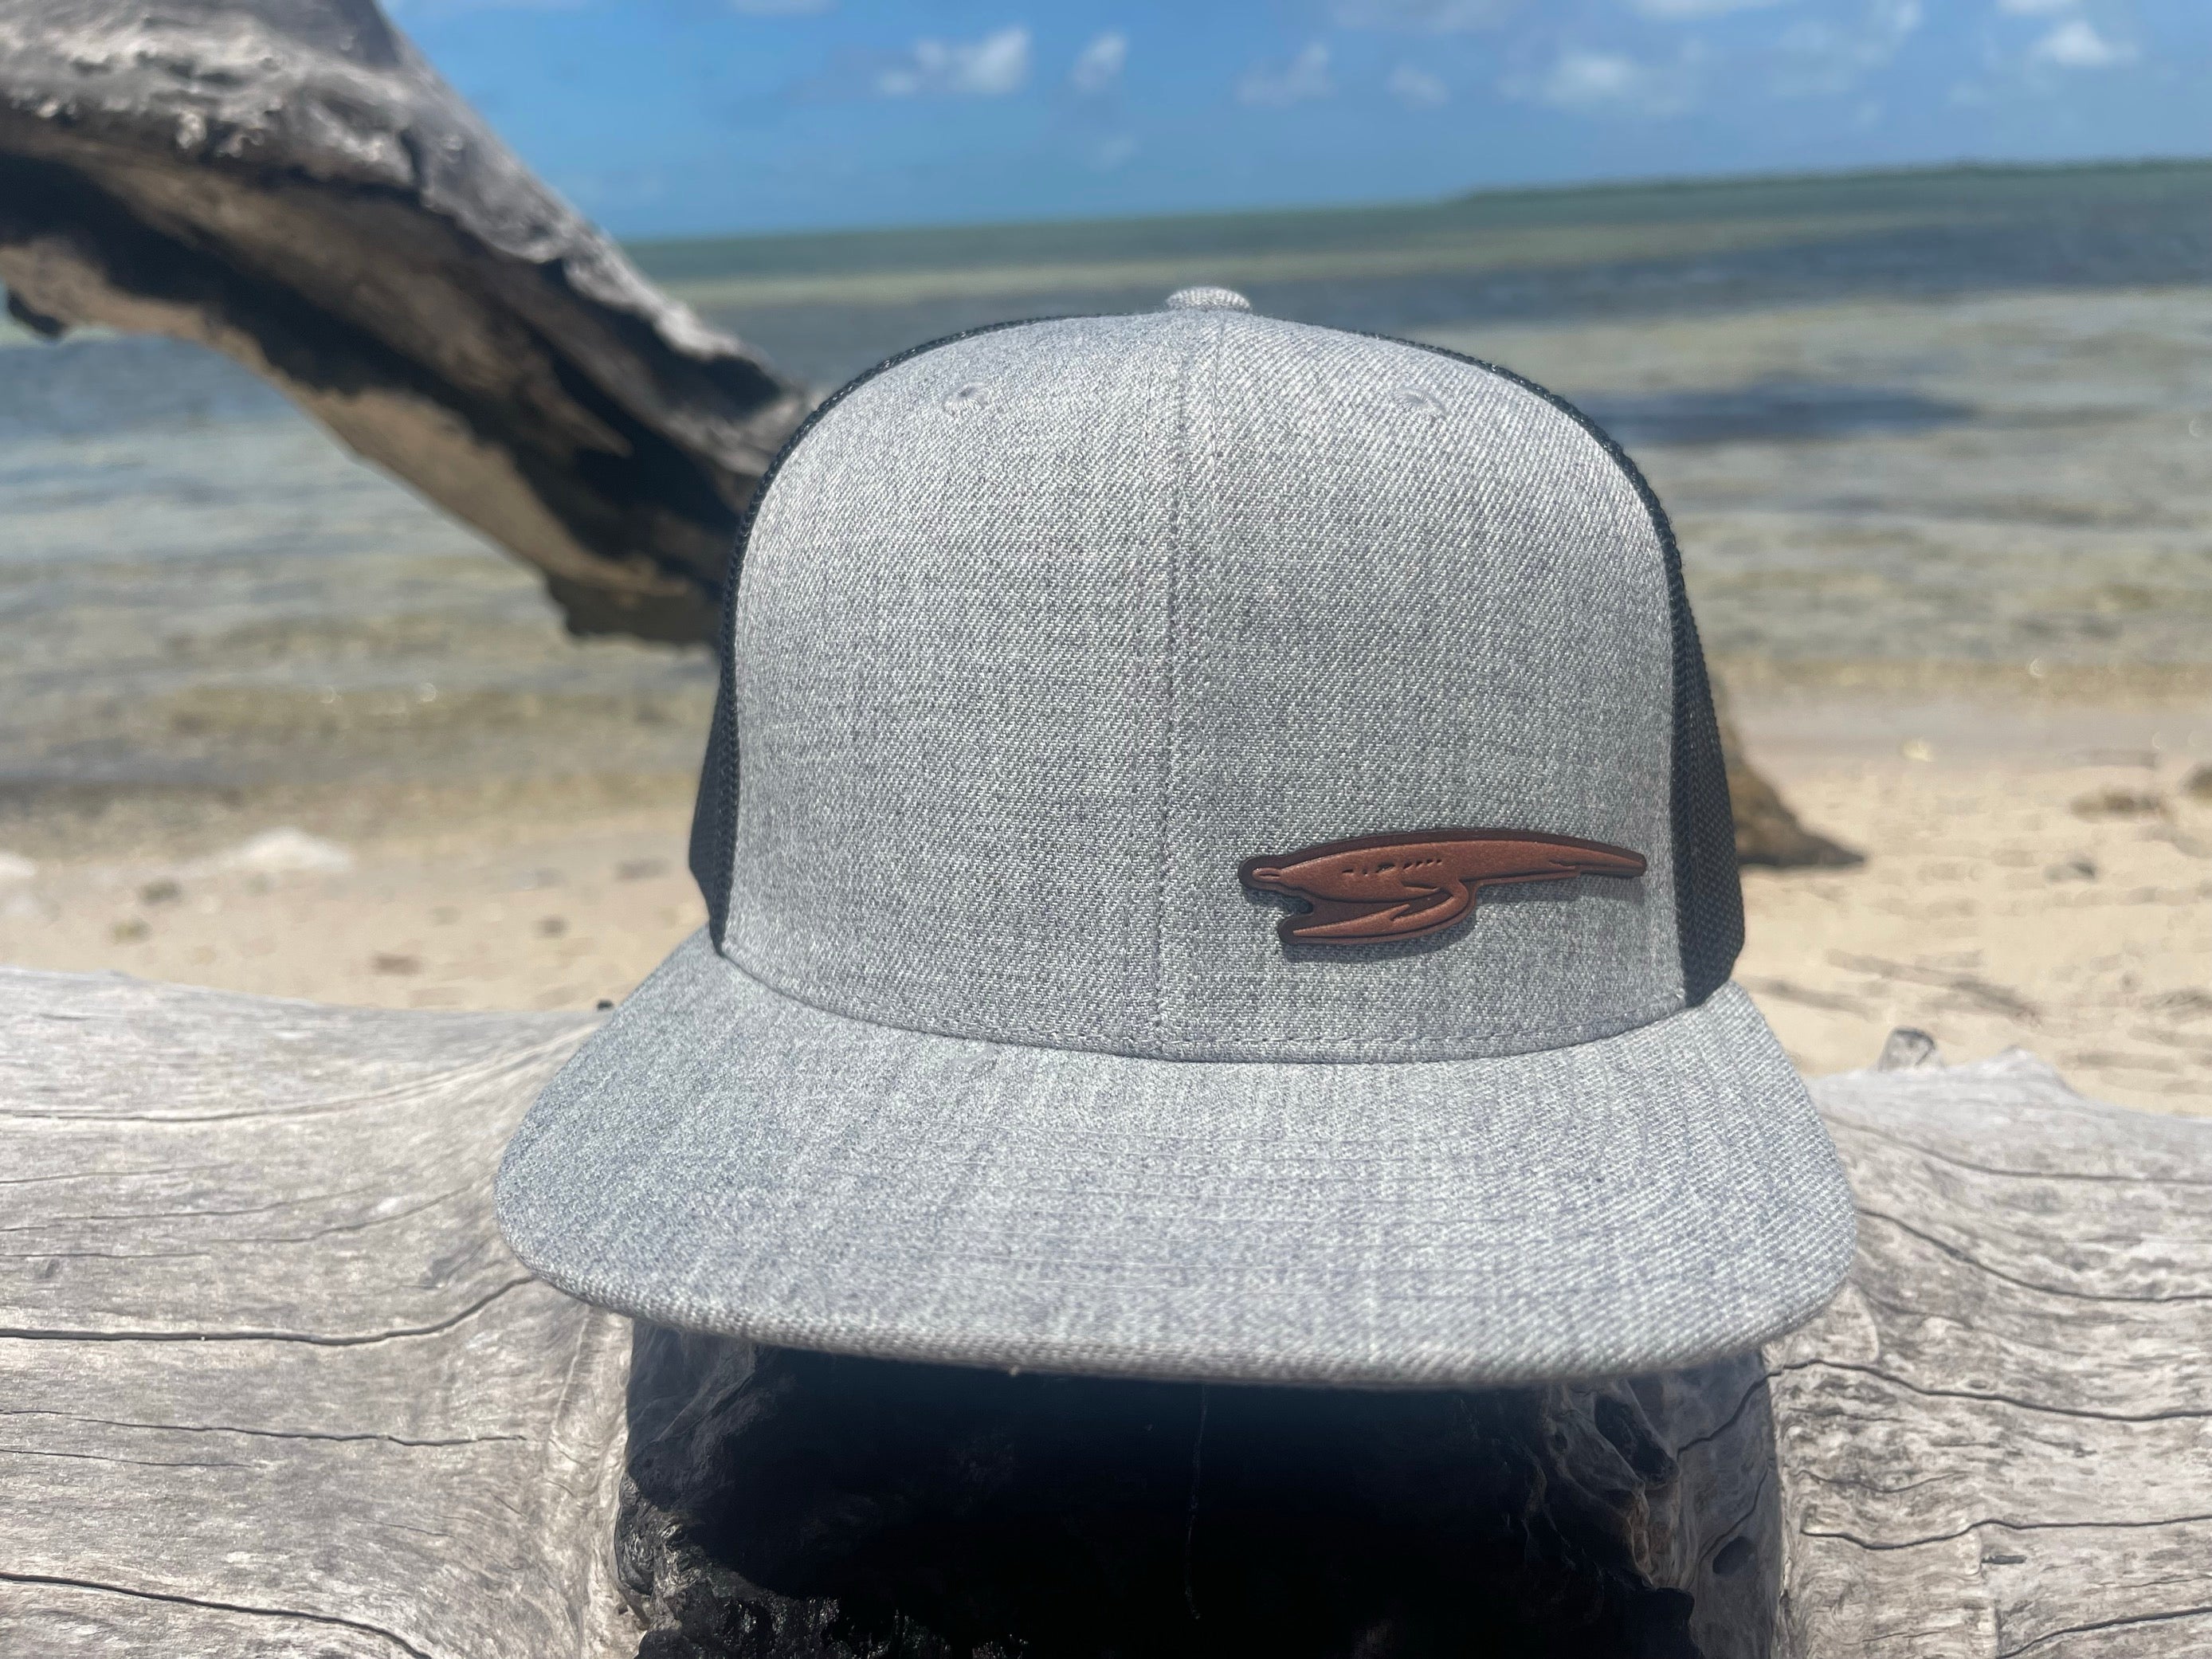 Spanish Fly Leather Bug 511 Trucker Hat